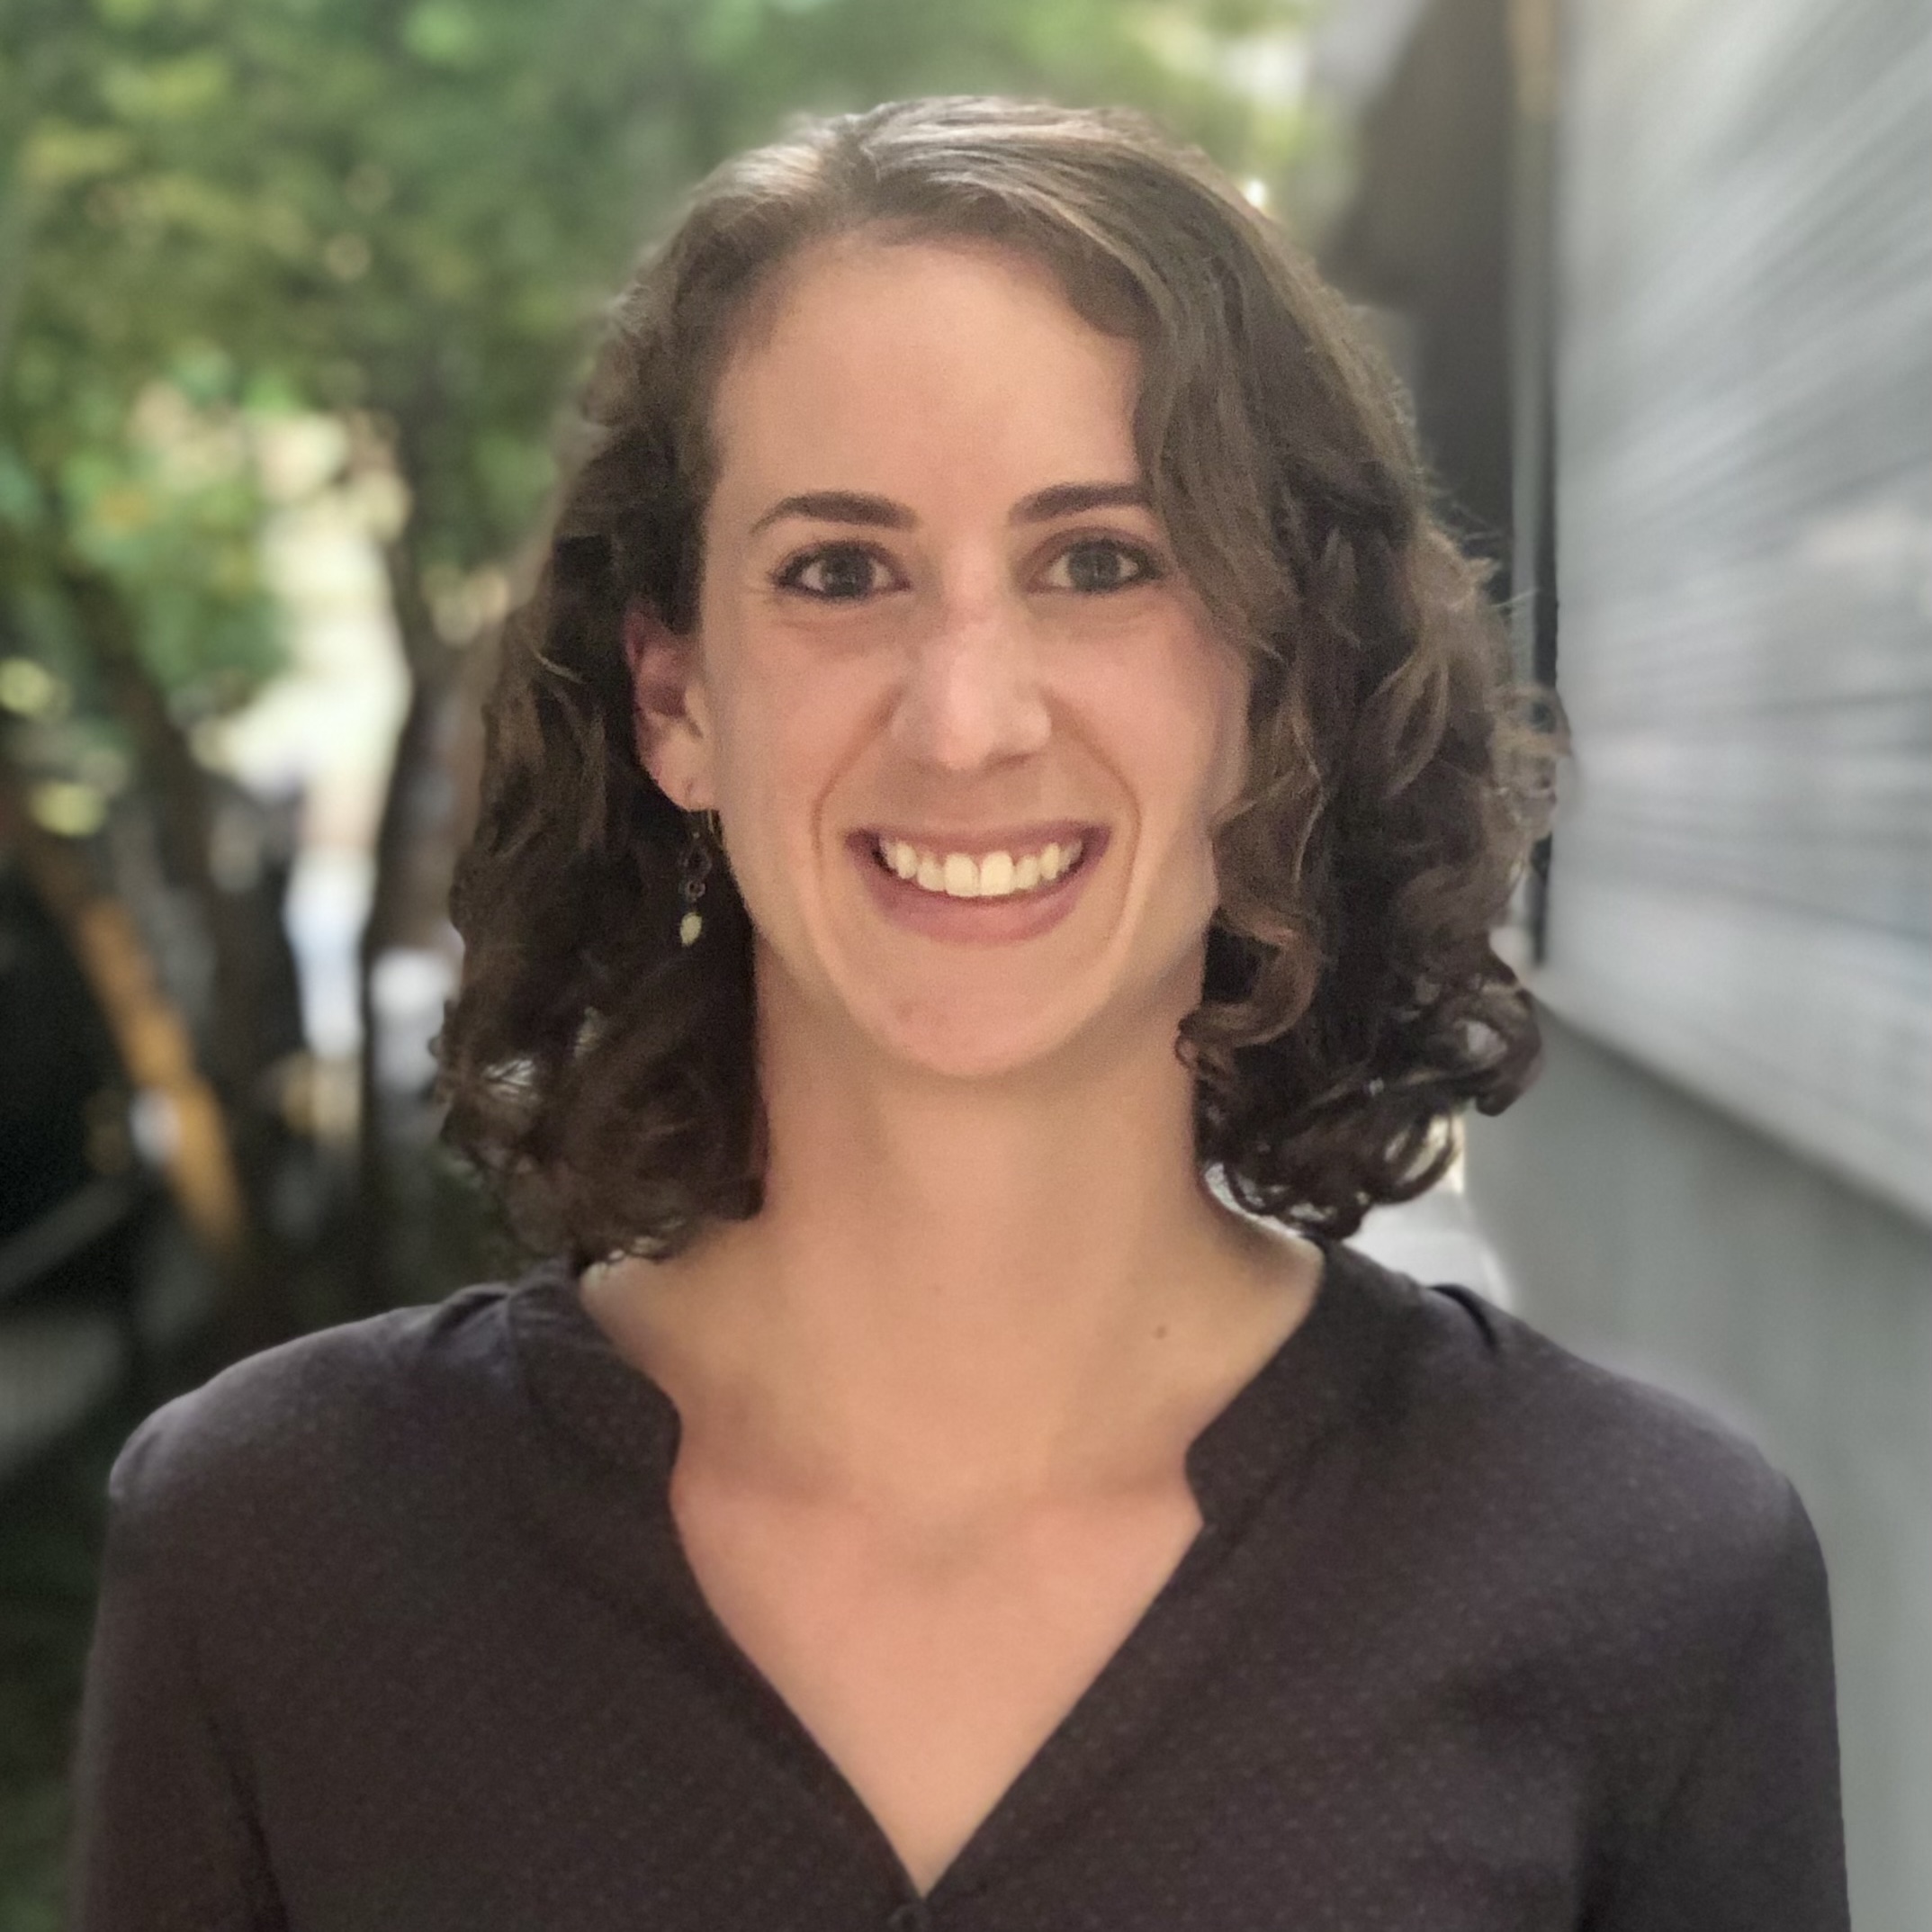 Profile picture of CPDP graduate student Emily Weinberger